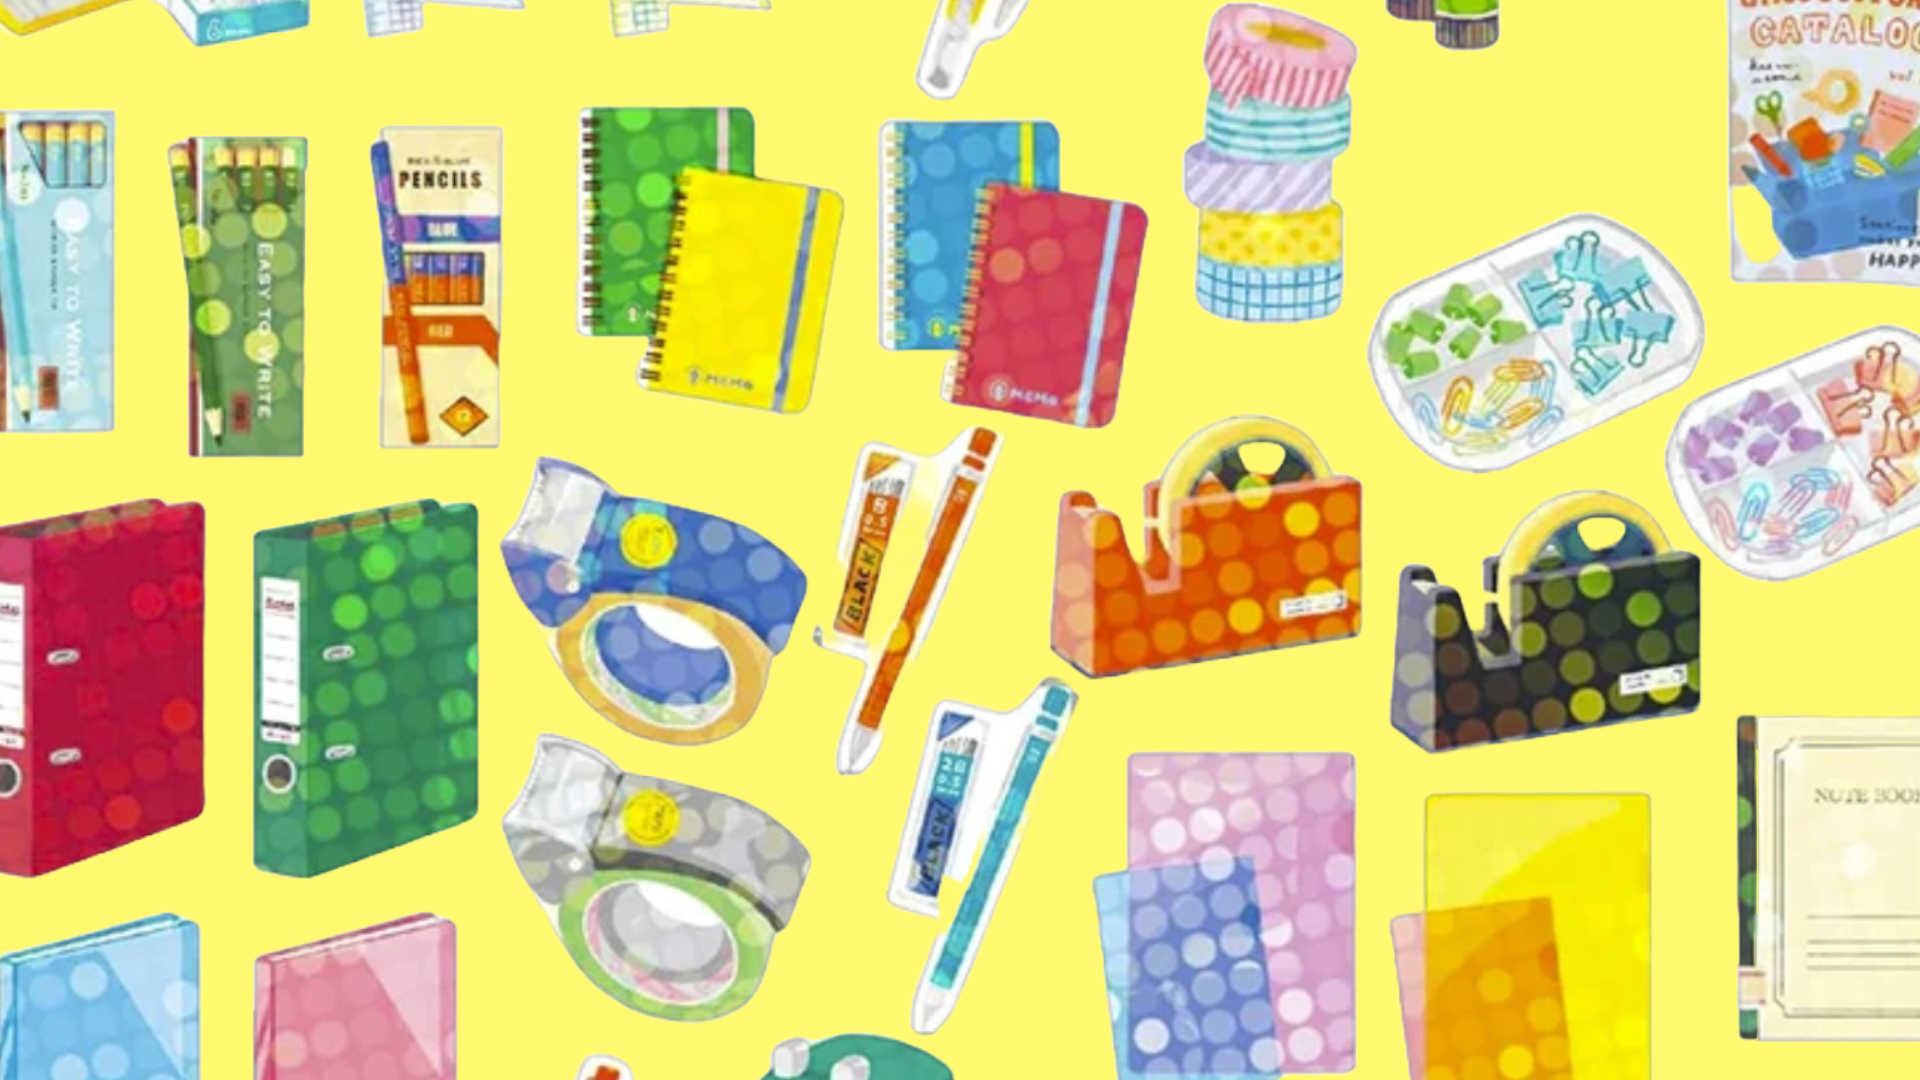 hologram images of office supplies on a yellow background